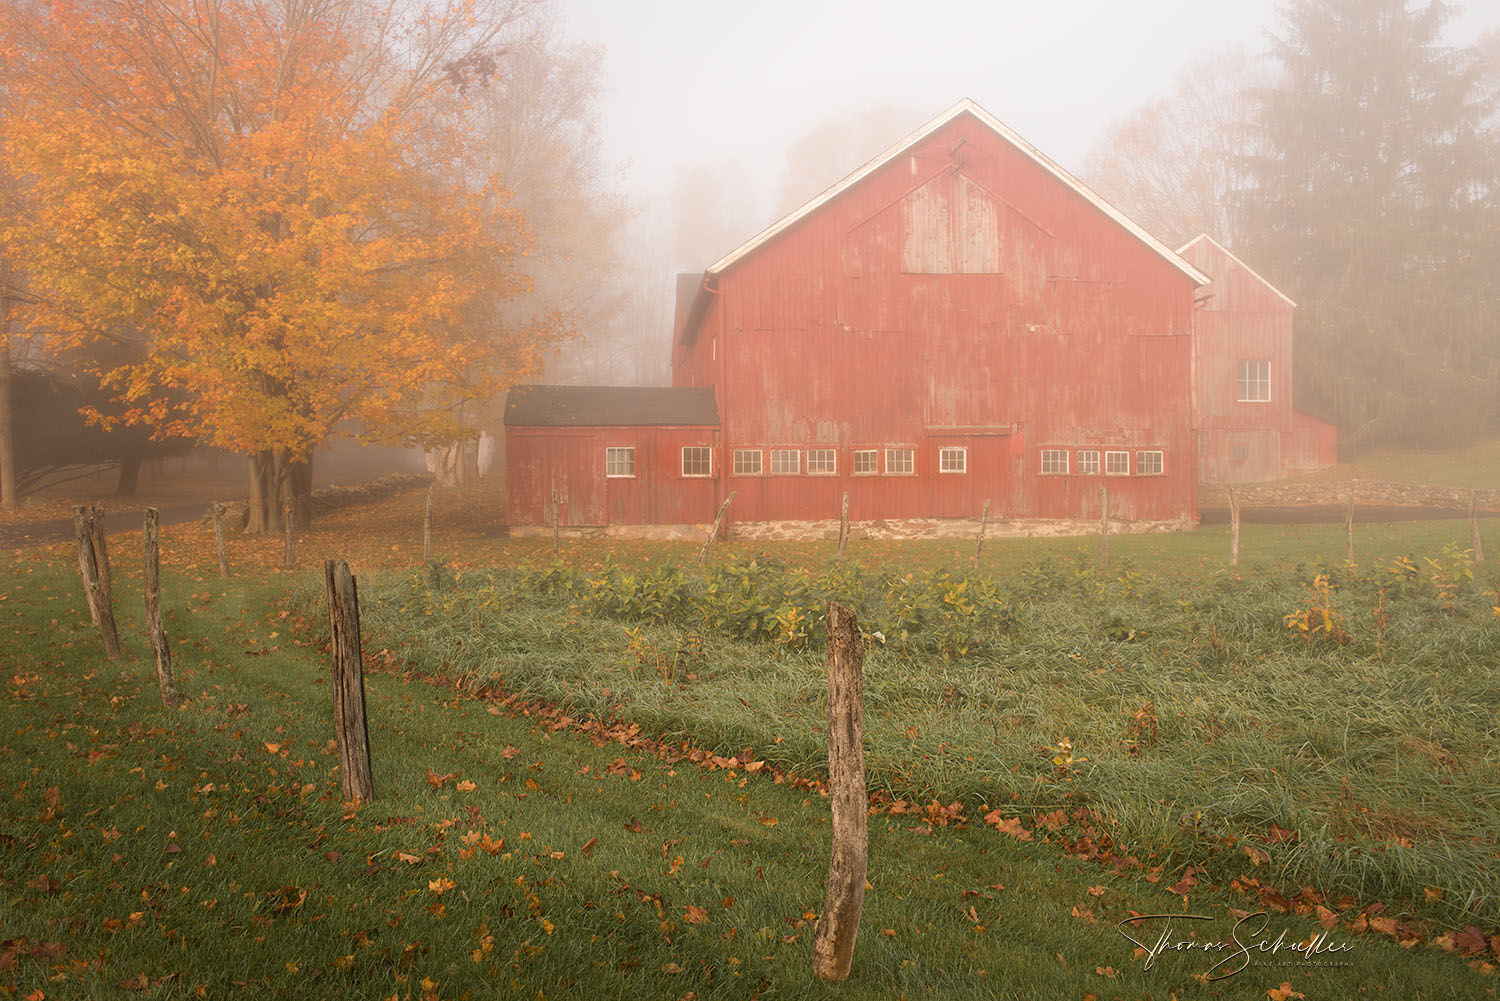 Bucolic New England scene featuring a rustic old red barn on a misty autumn morning | The artist transports the viewer back to Simpler Times of days gone by